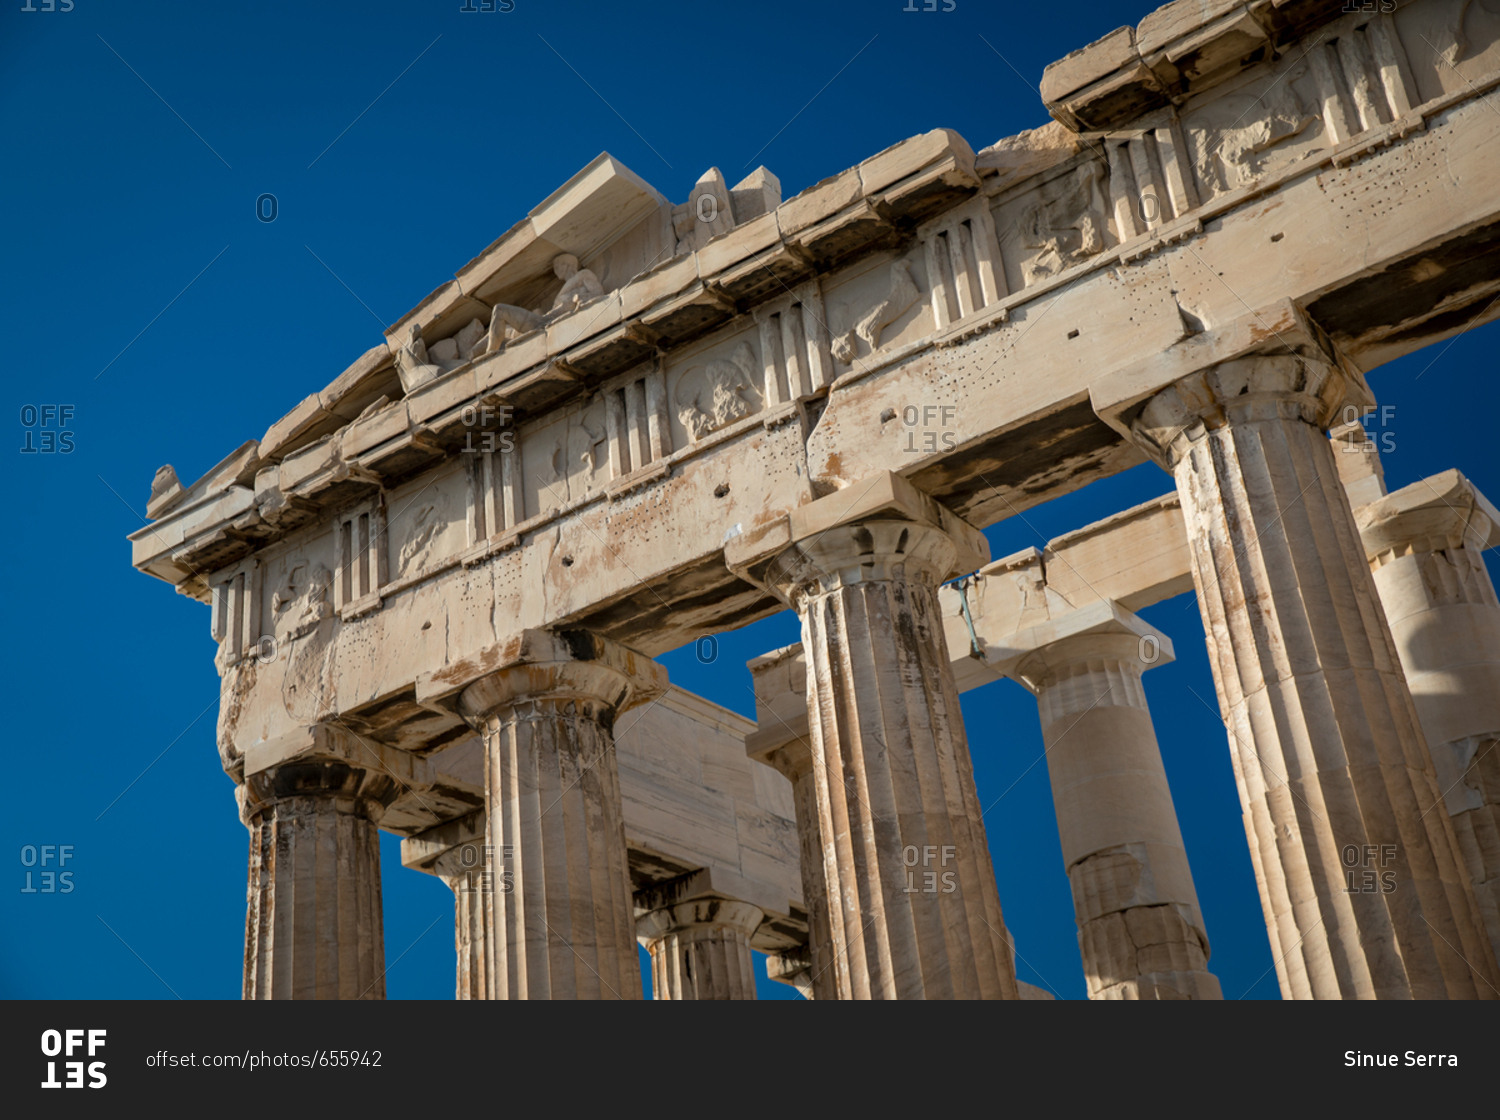 Detail of the Parthenon of the Acropolis of Athens Set Against the Blue Sky